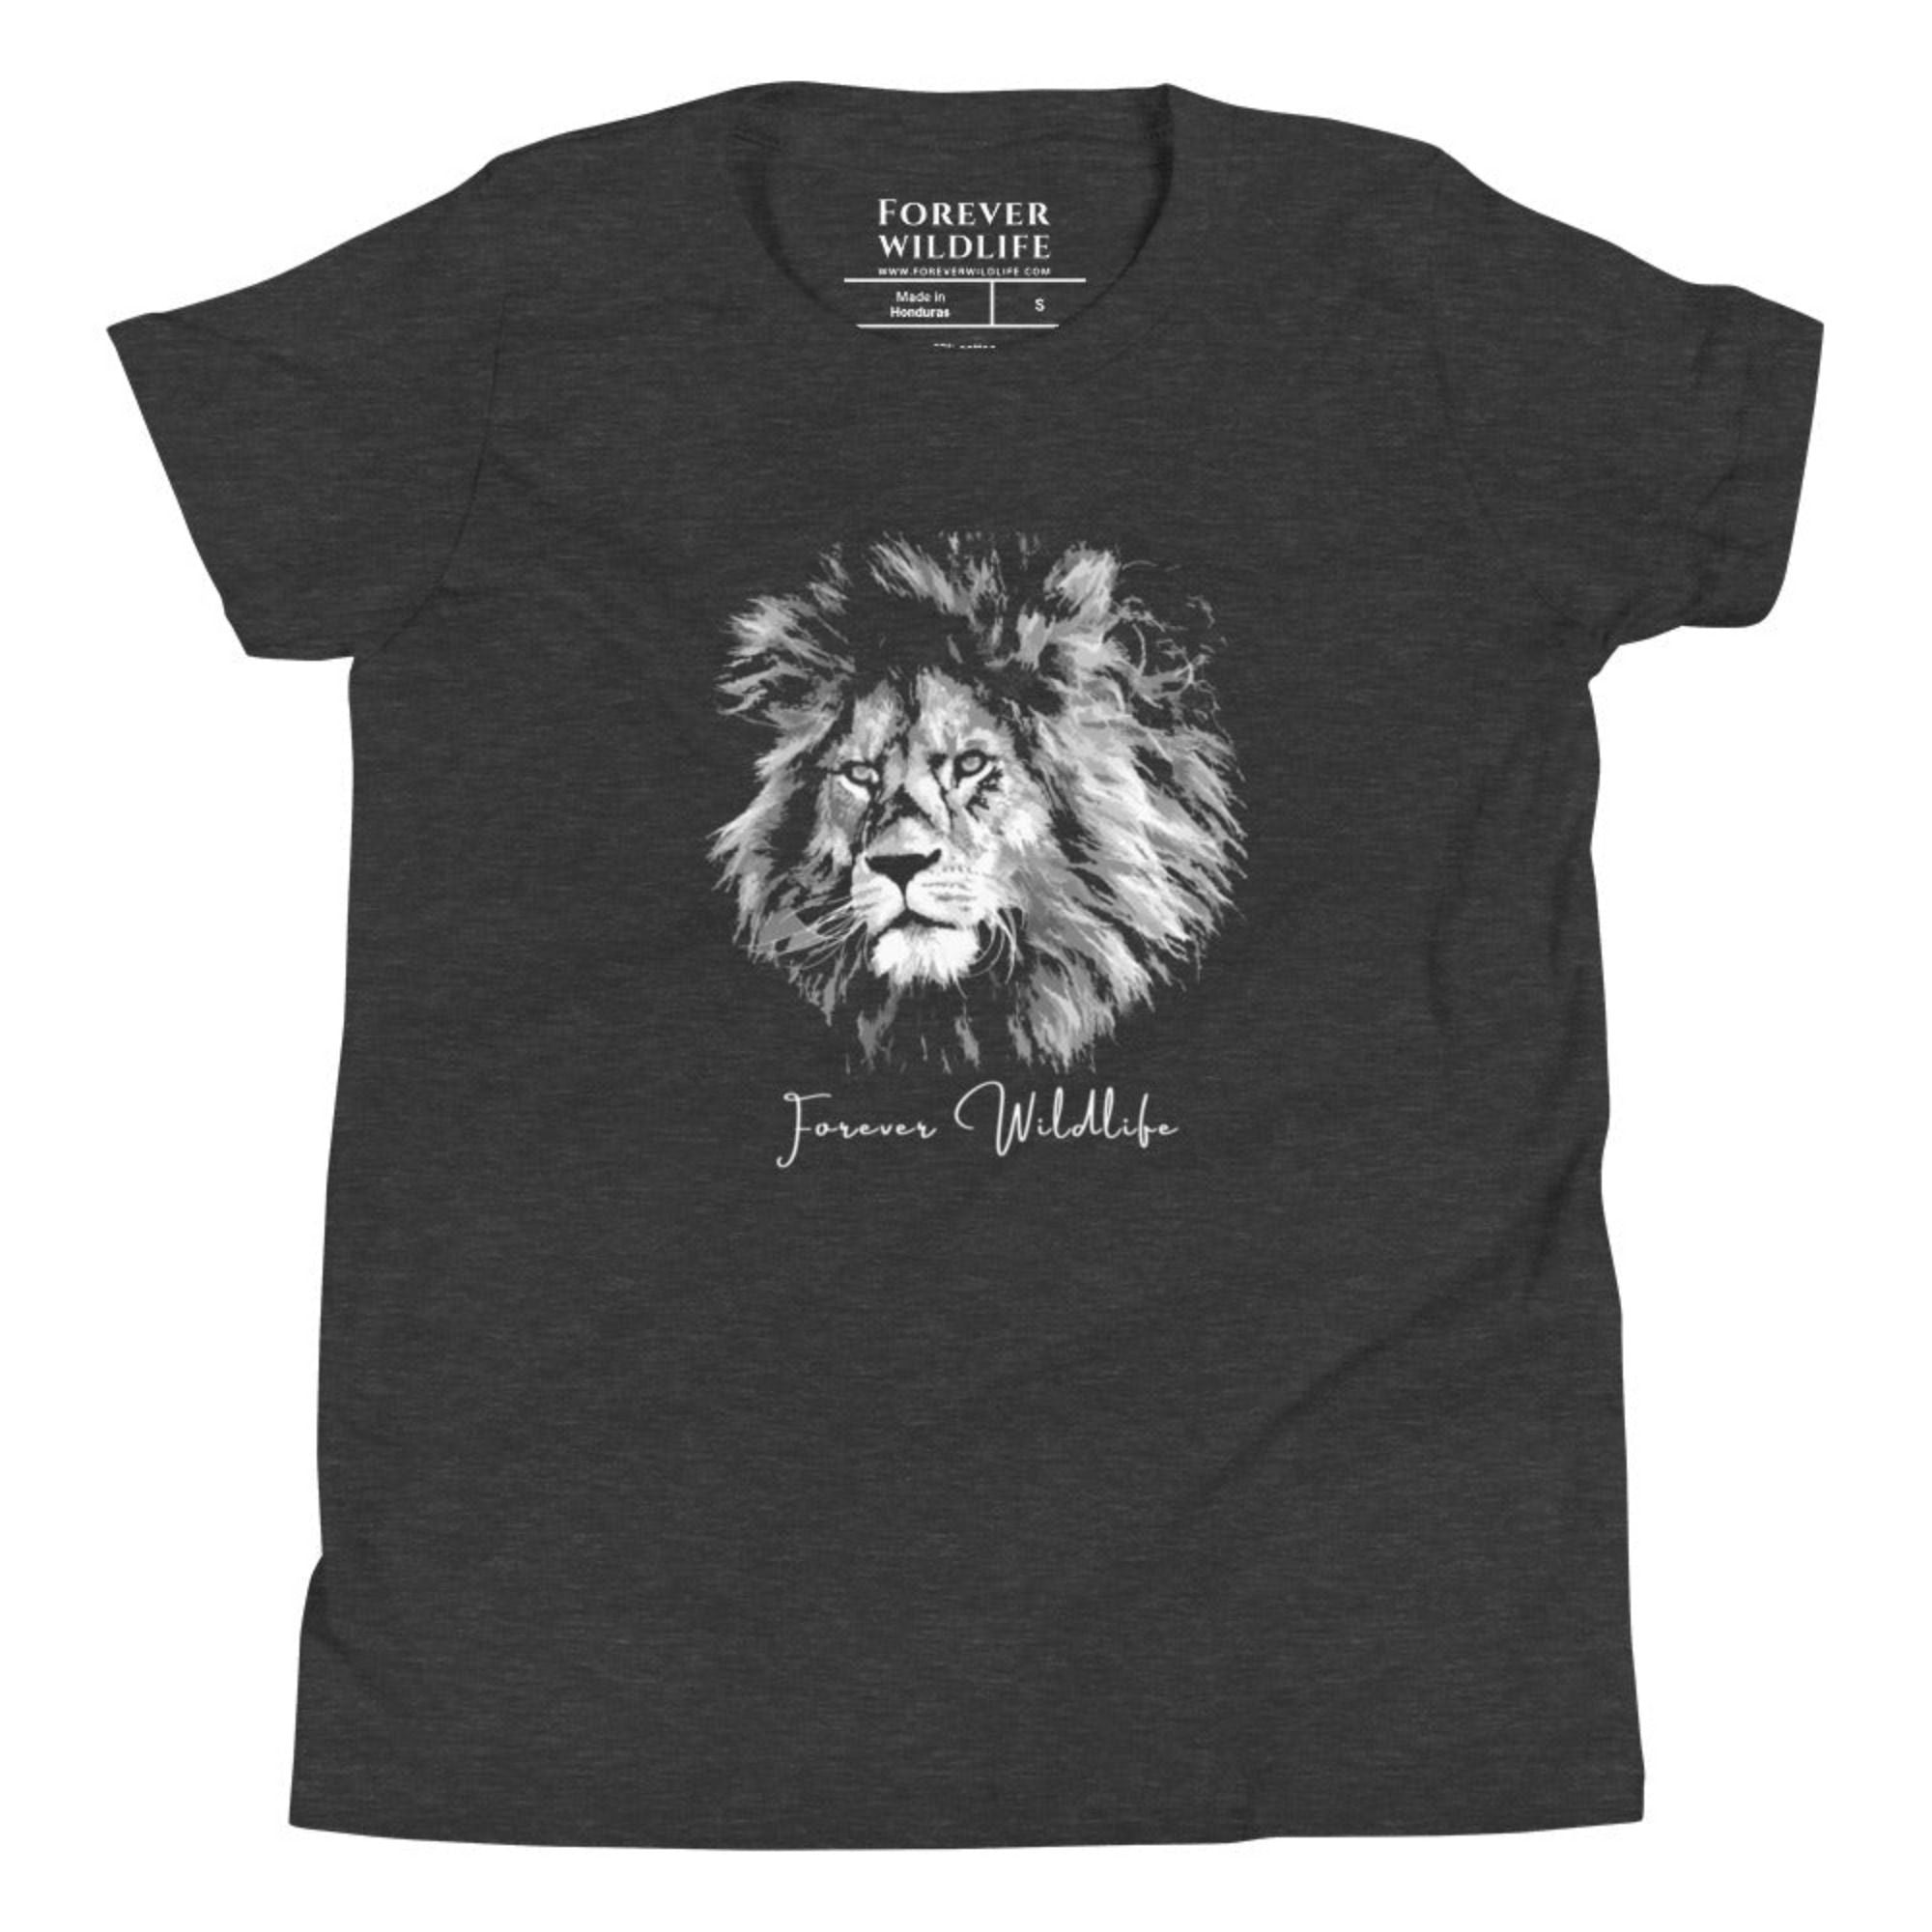 Grey Heather Youth T-Shirt with Lion graphic as part of Wildlife T Shirts, Wildlife Clothing & Apparel by Forever Wildlife